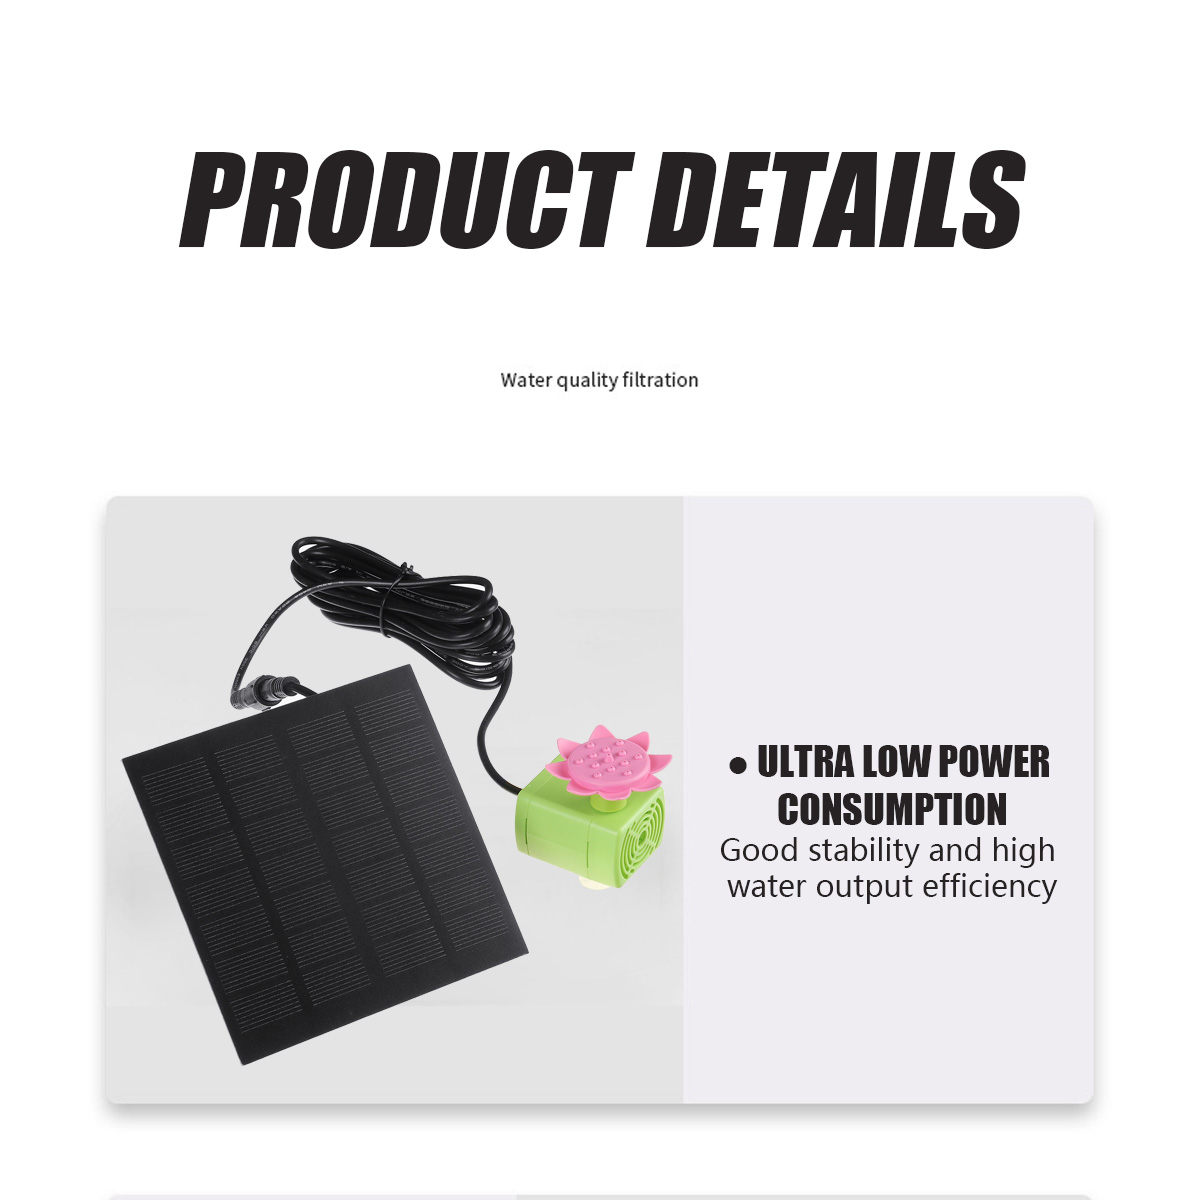 7V-14W-Solar-Powered-Water-Fountain-Pumps-Floating-Fountains-Pump-Waterproof-Home-Pond-Garden-Decor-1839781-5